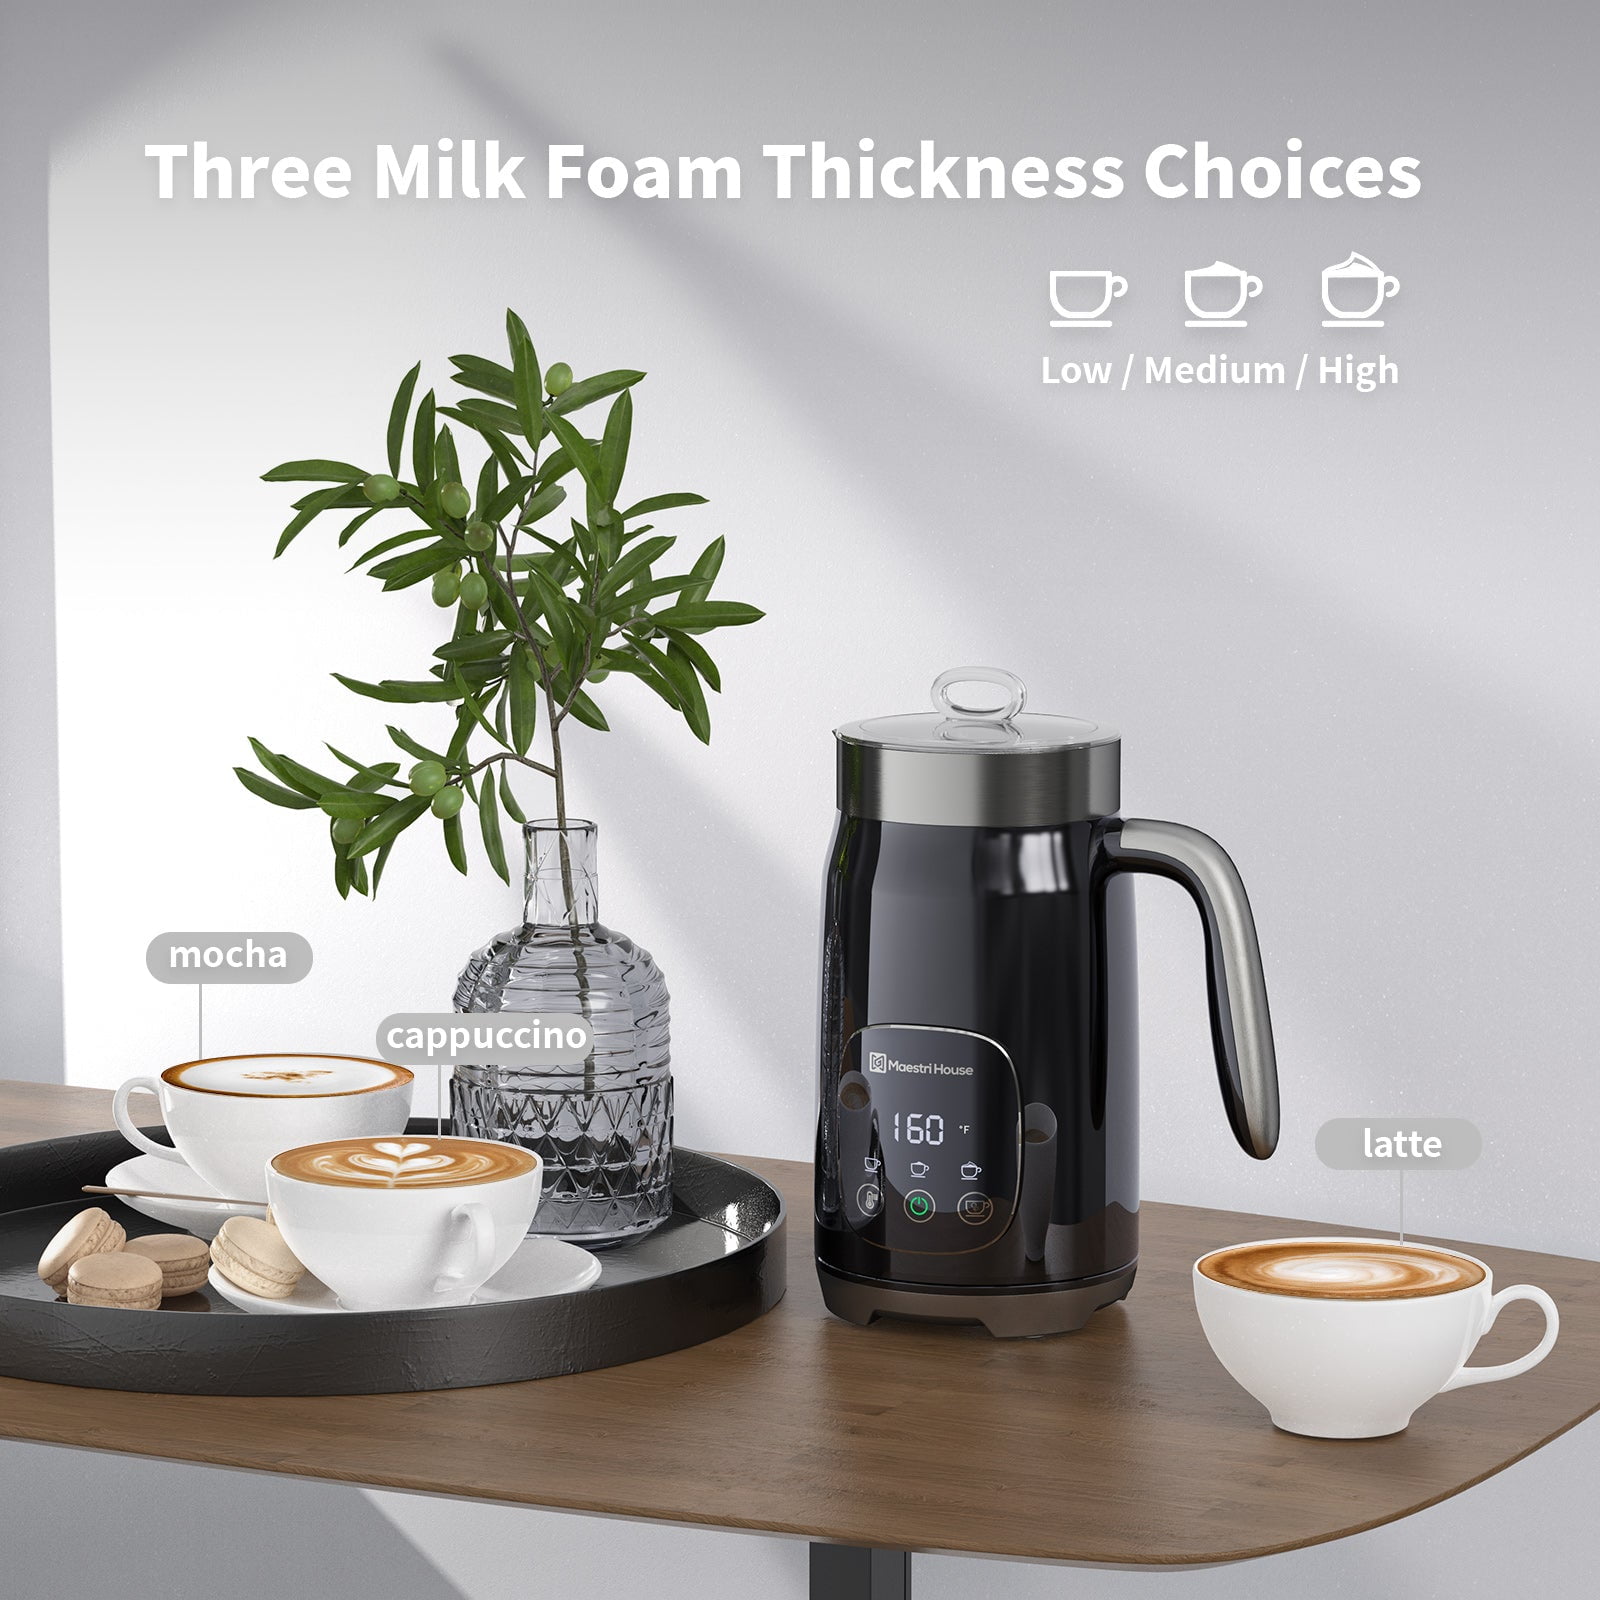 Make Café-Worthy Lattes With This Milk Frother That's Up to 67% Off at